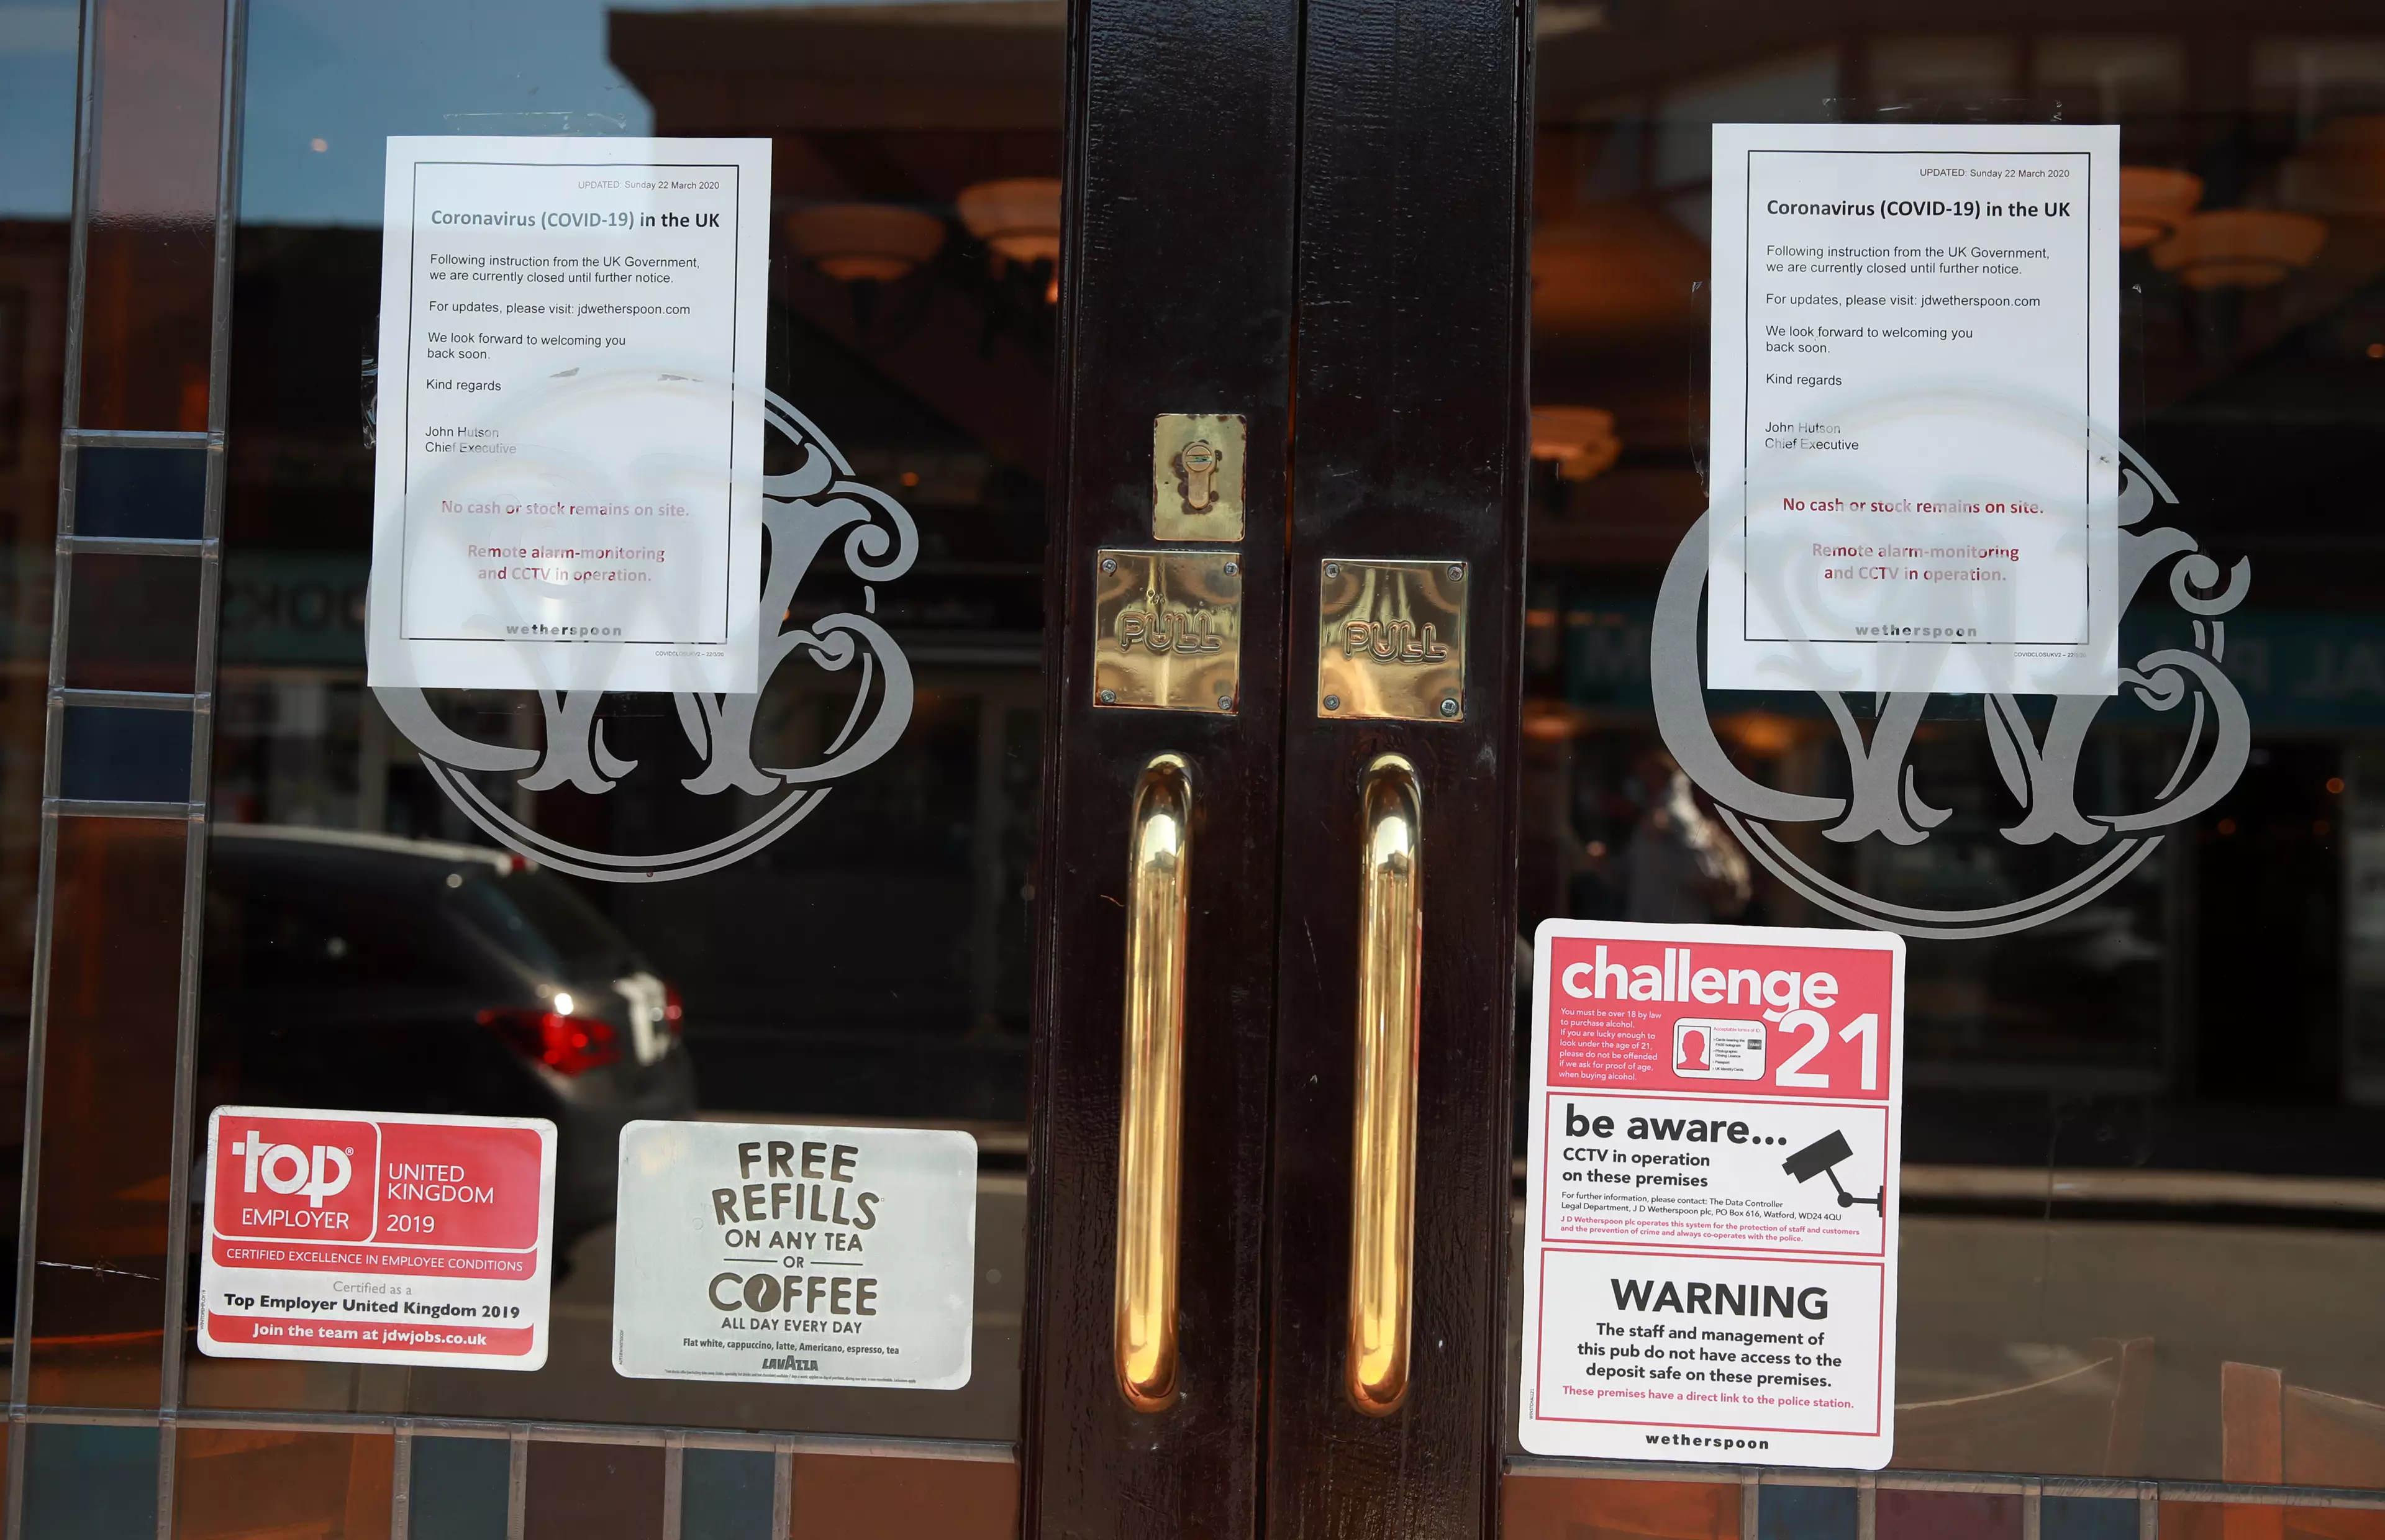 All Wetherspoon's pubs are currently closed due to coronavirus lockdown measures.